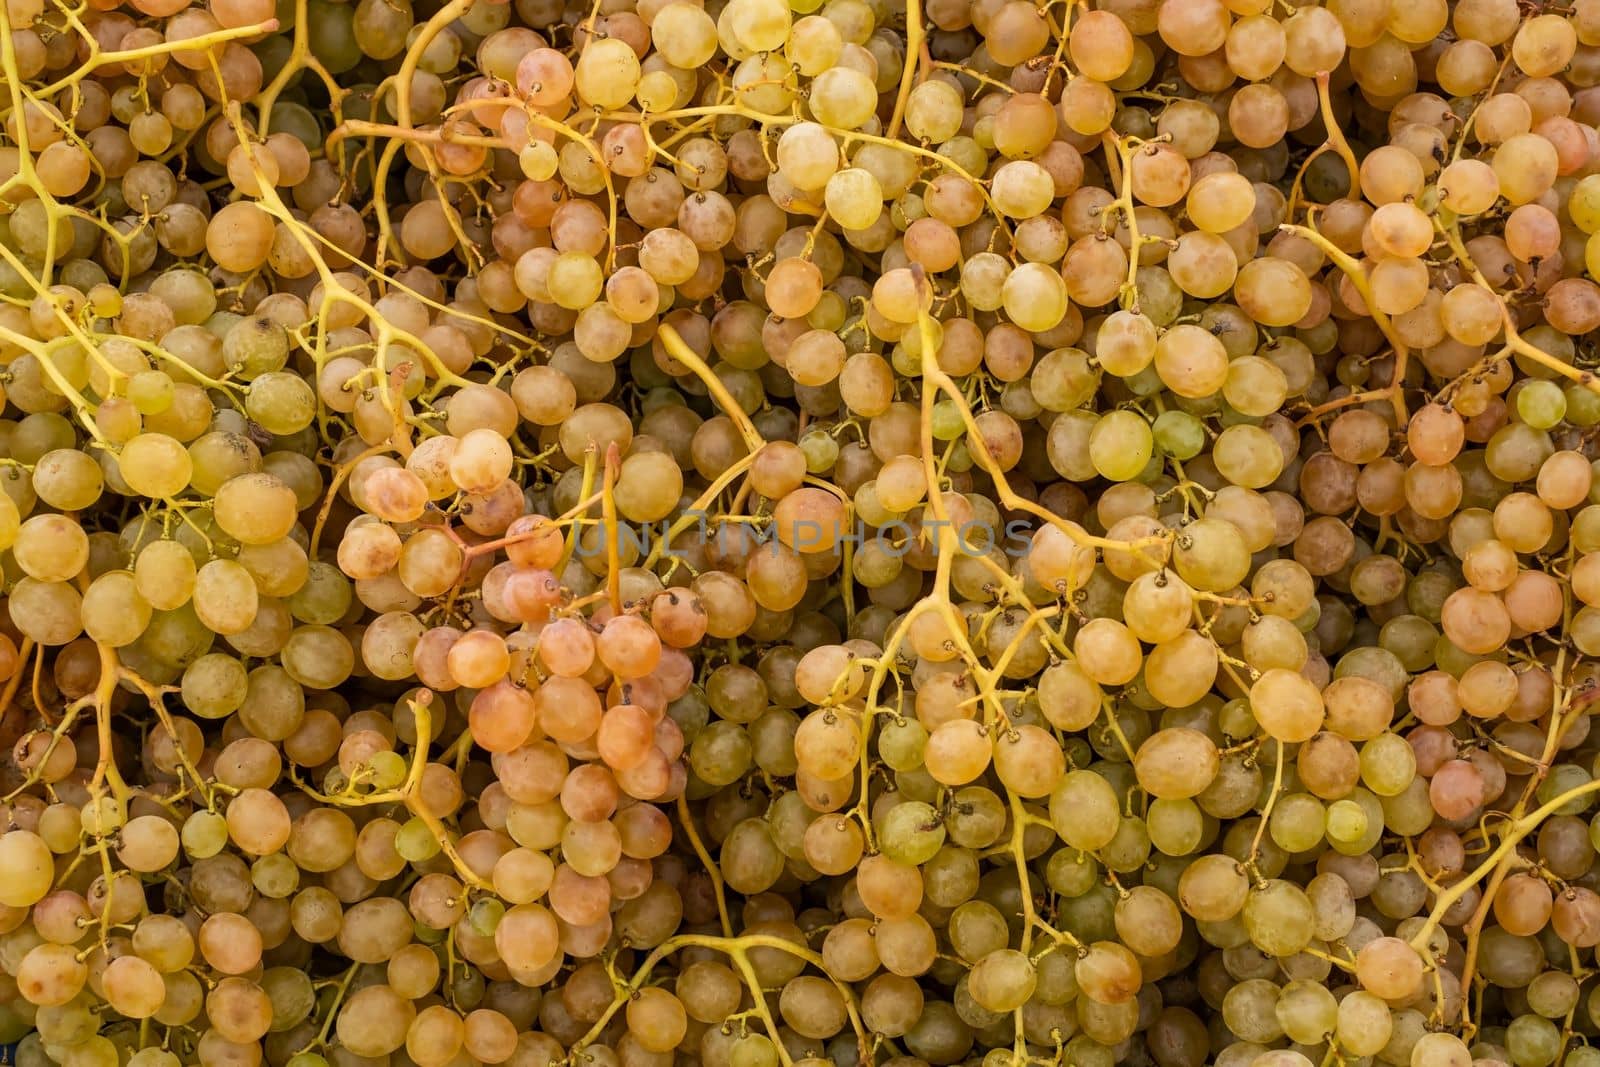  Grape in the bazaar sall. sale, shopping and eco food concept